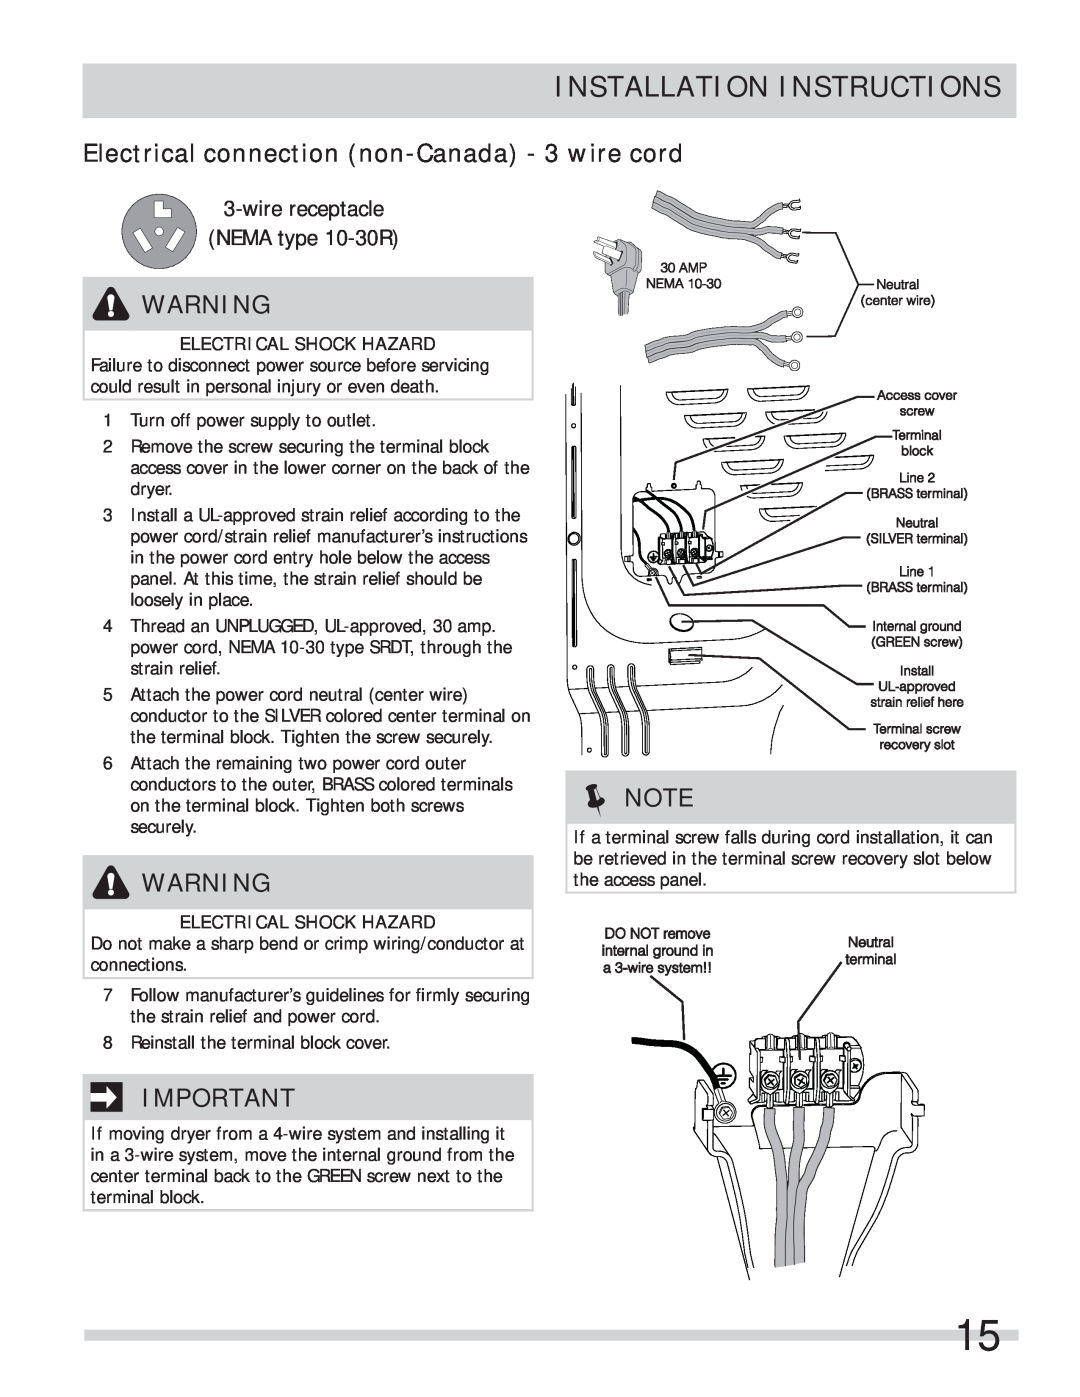 Frigidaire 137134900B Electrical connection non-Canada - 3 wire cord, Installation Instructions, Electrical Shock Hazard 